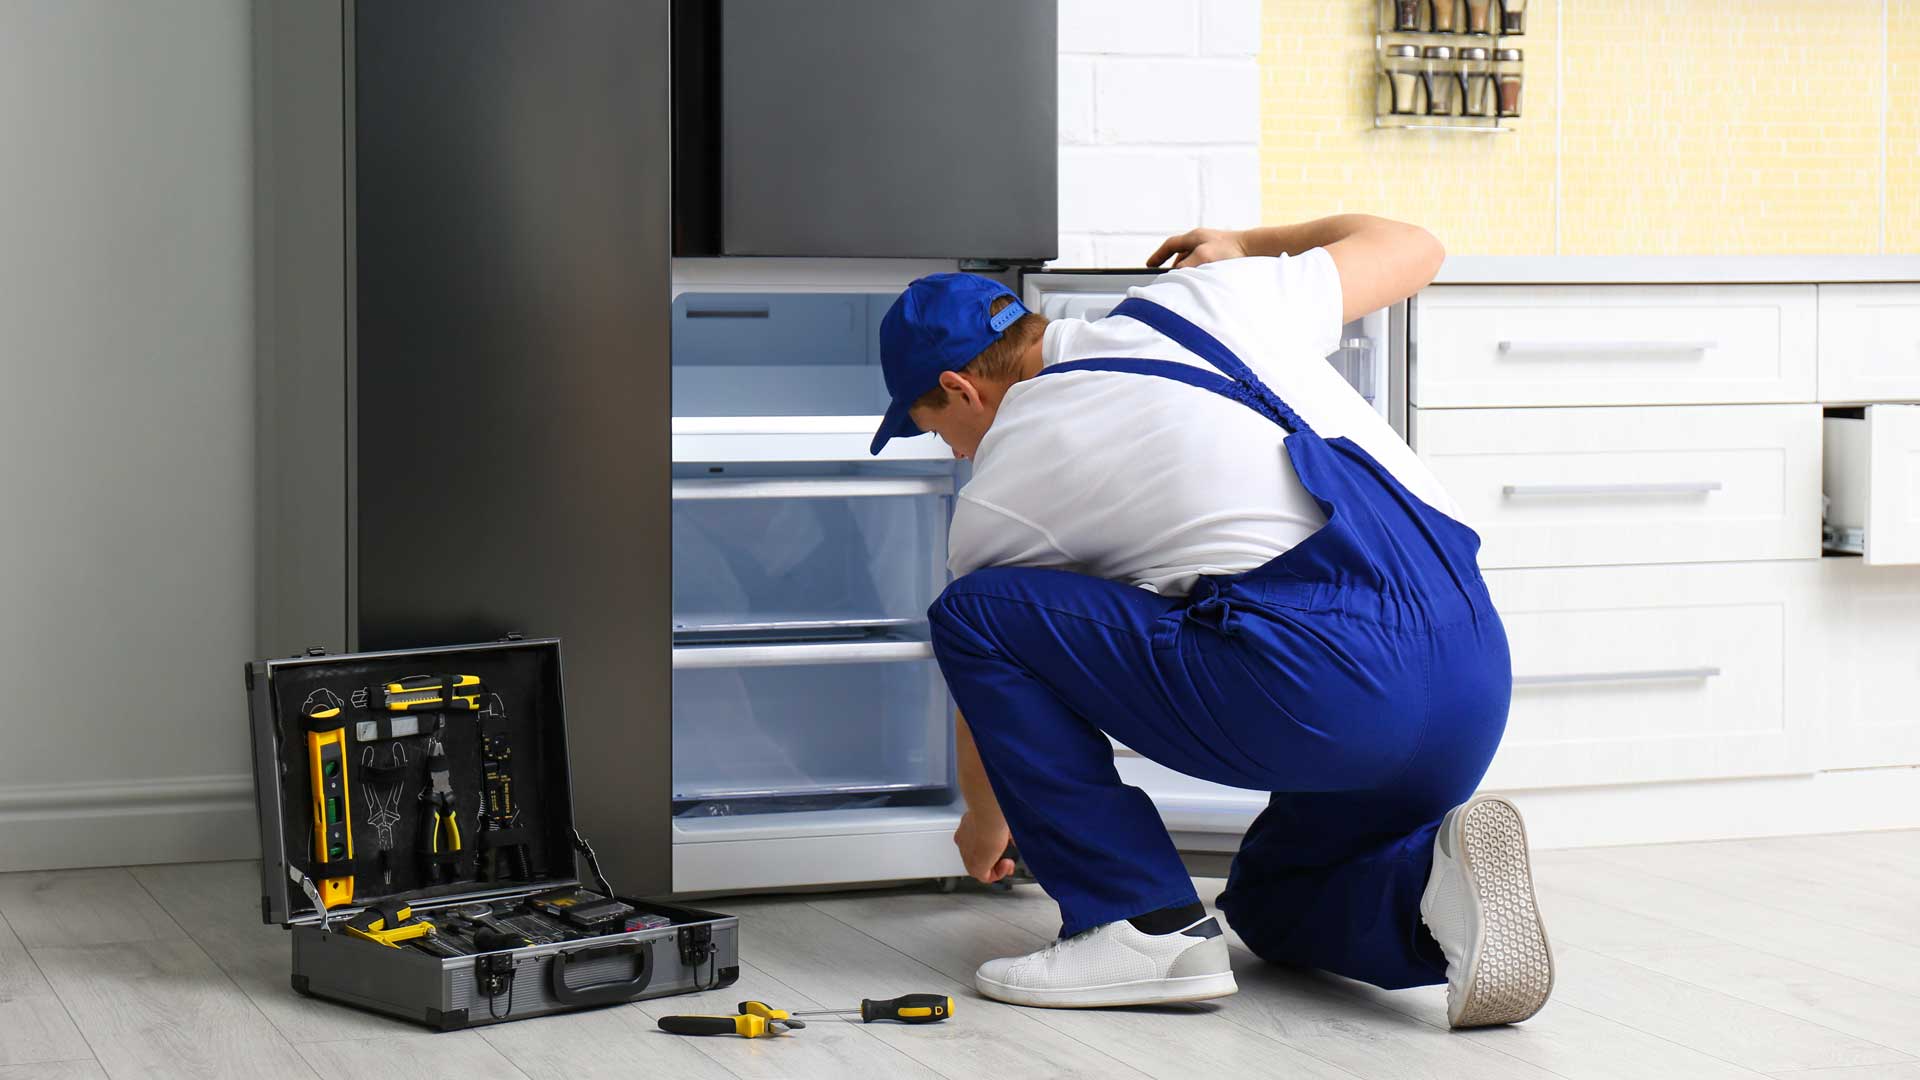 A man in blue overalls repairing a refrigerator